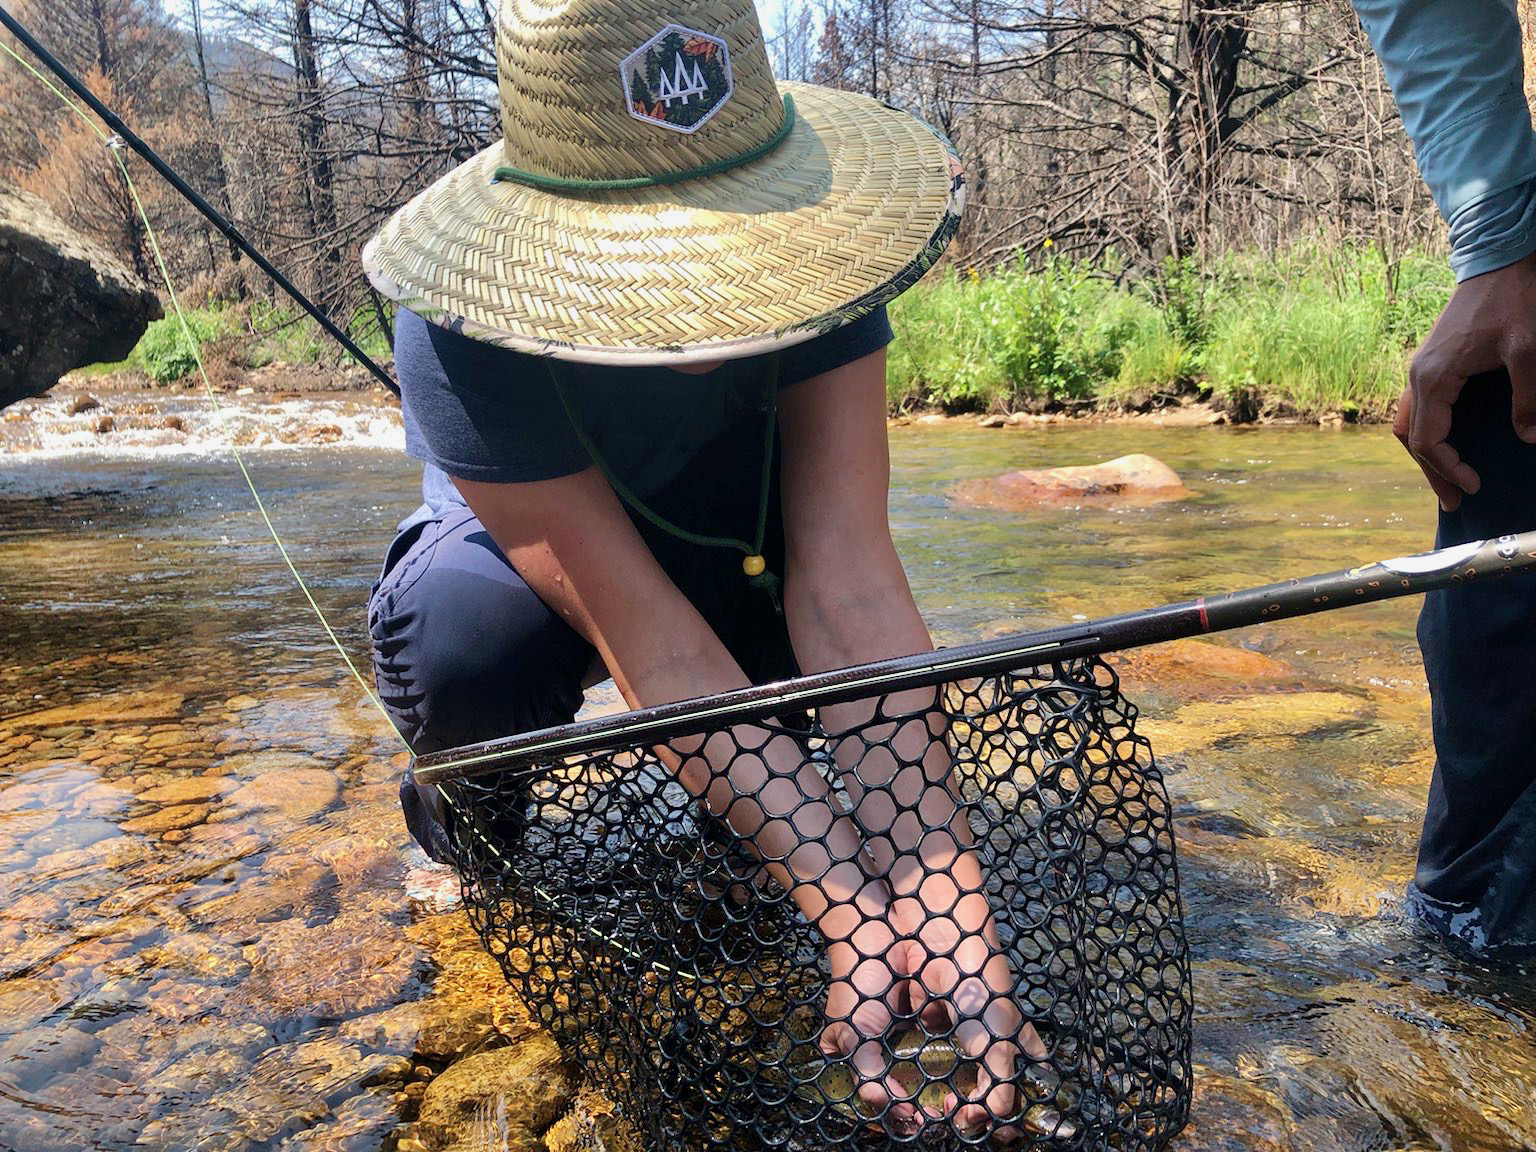 Woman picking a fish up out of a fly fishing net